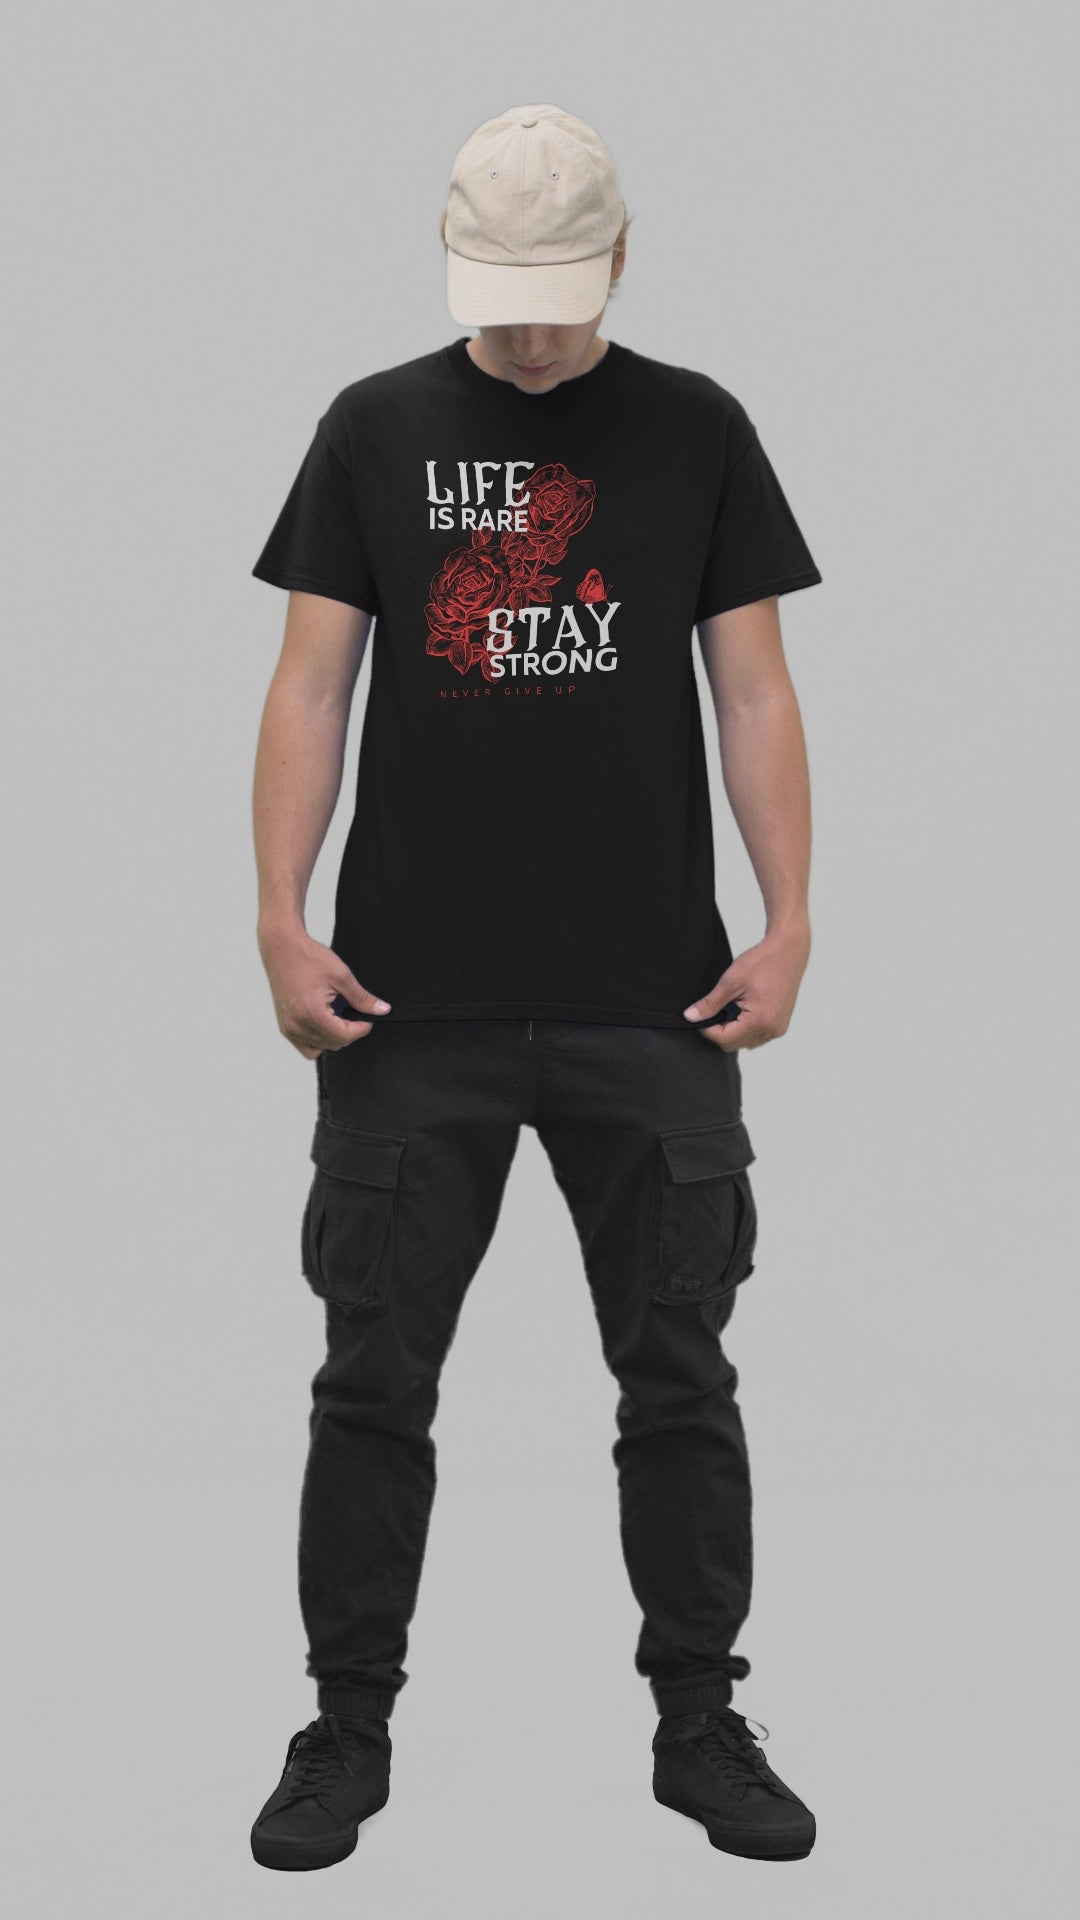 A young man models confidently, wearing a black t-shirt that features a red rose design and an empowering message in white text reading 'LIFE IS RARE STAY STRONG' with 'Never Give Up'